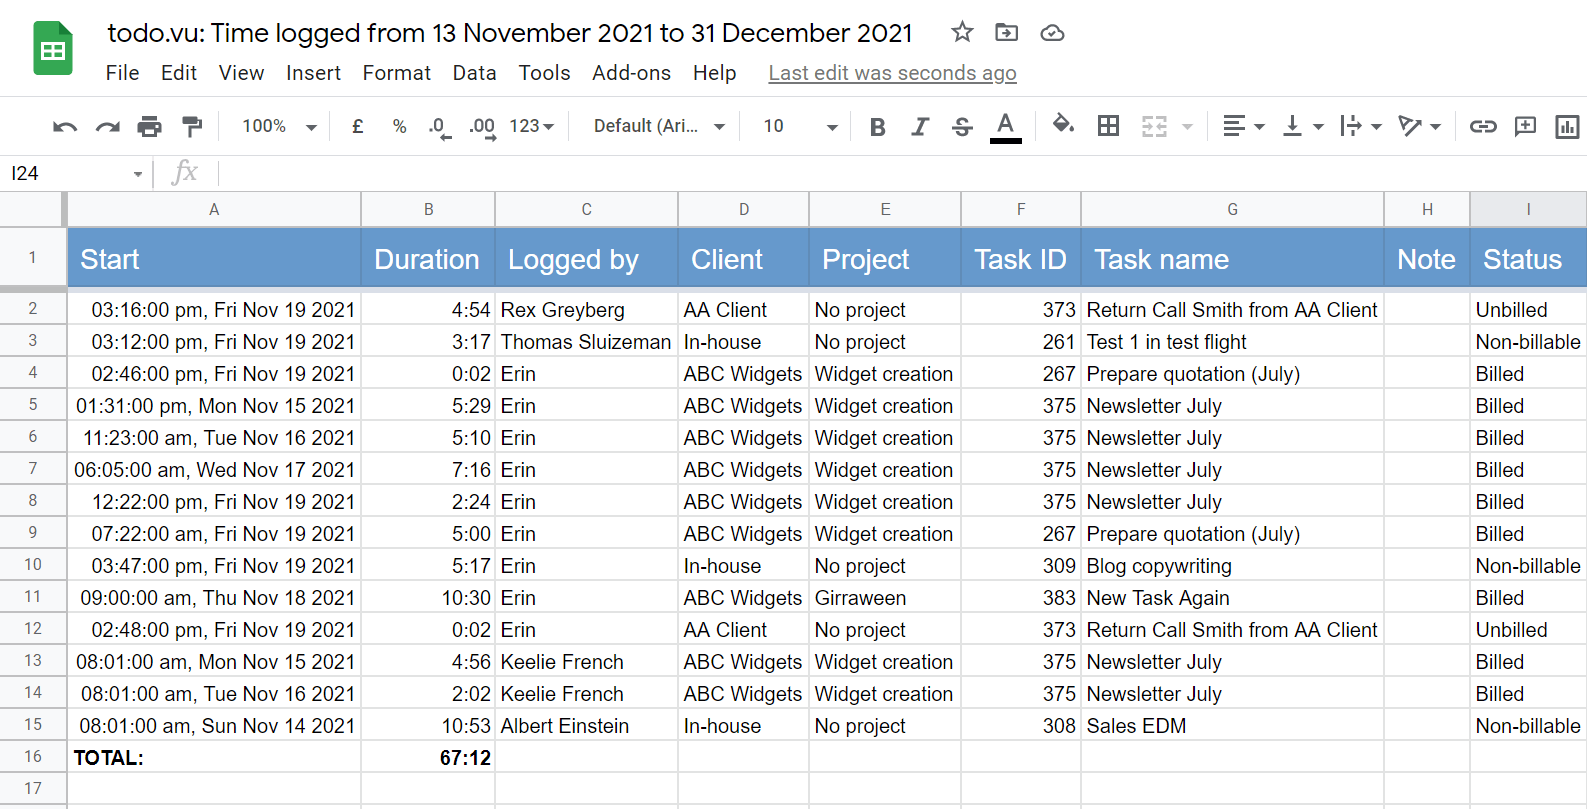 An example of a business time billing report exported to a Google Sheets document for further analysis.